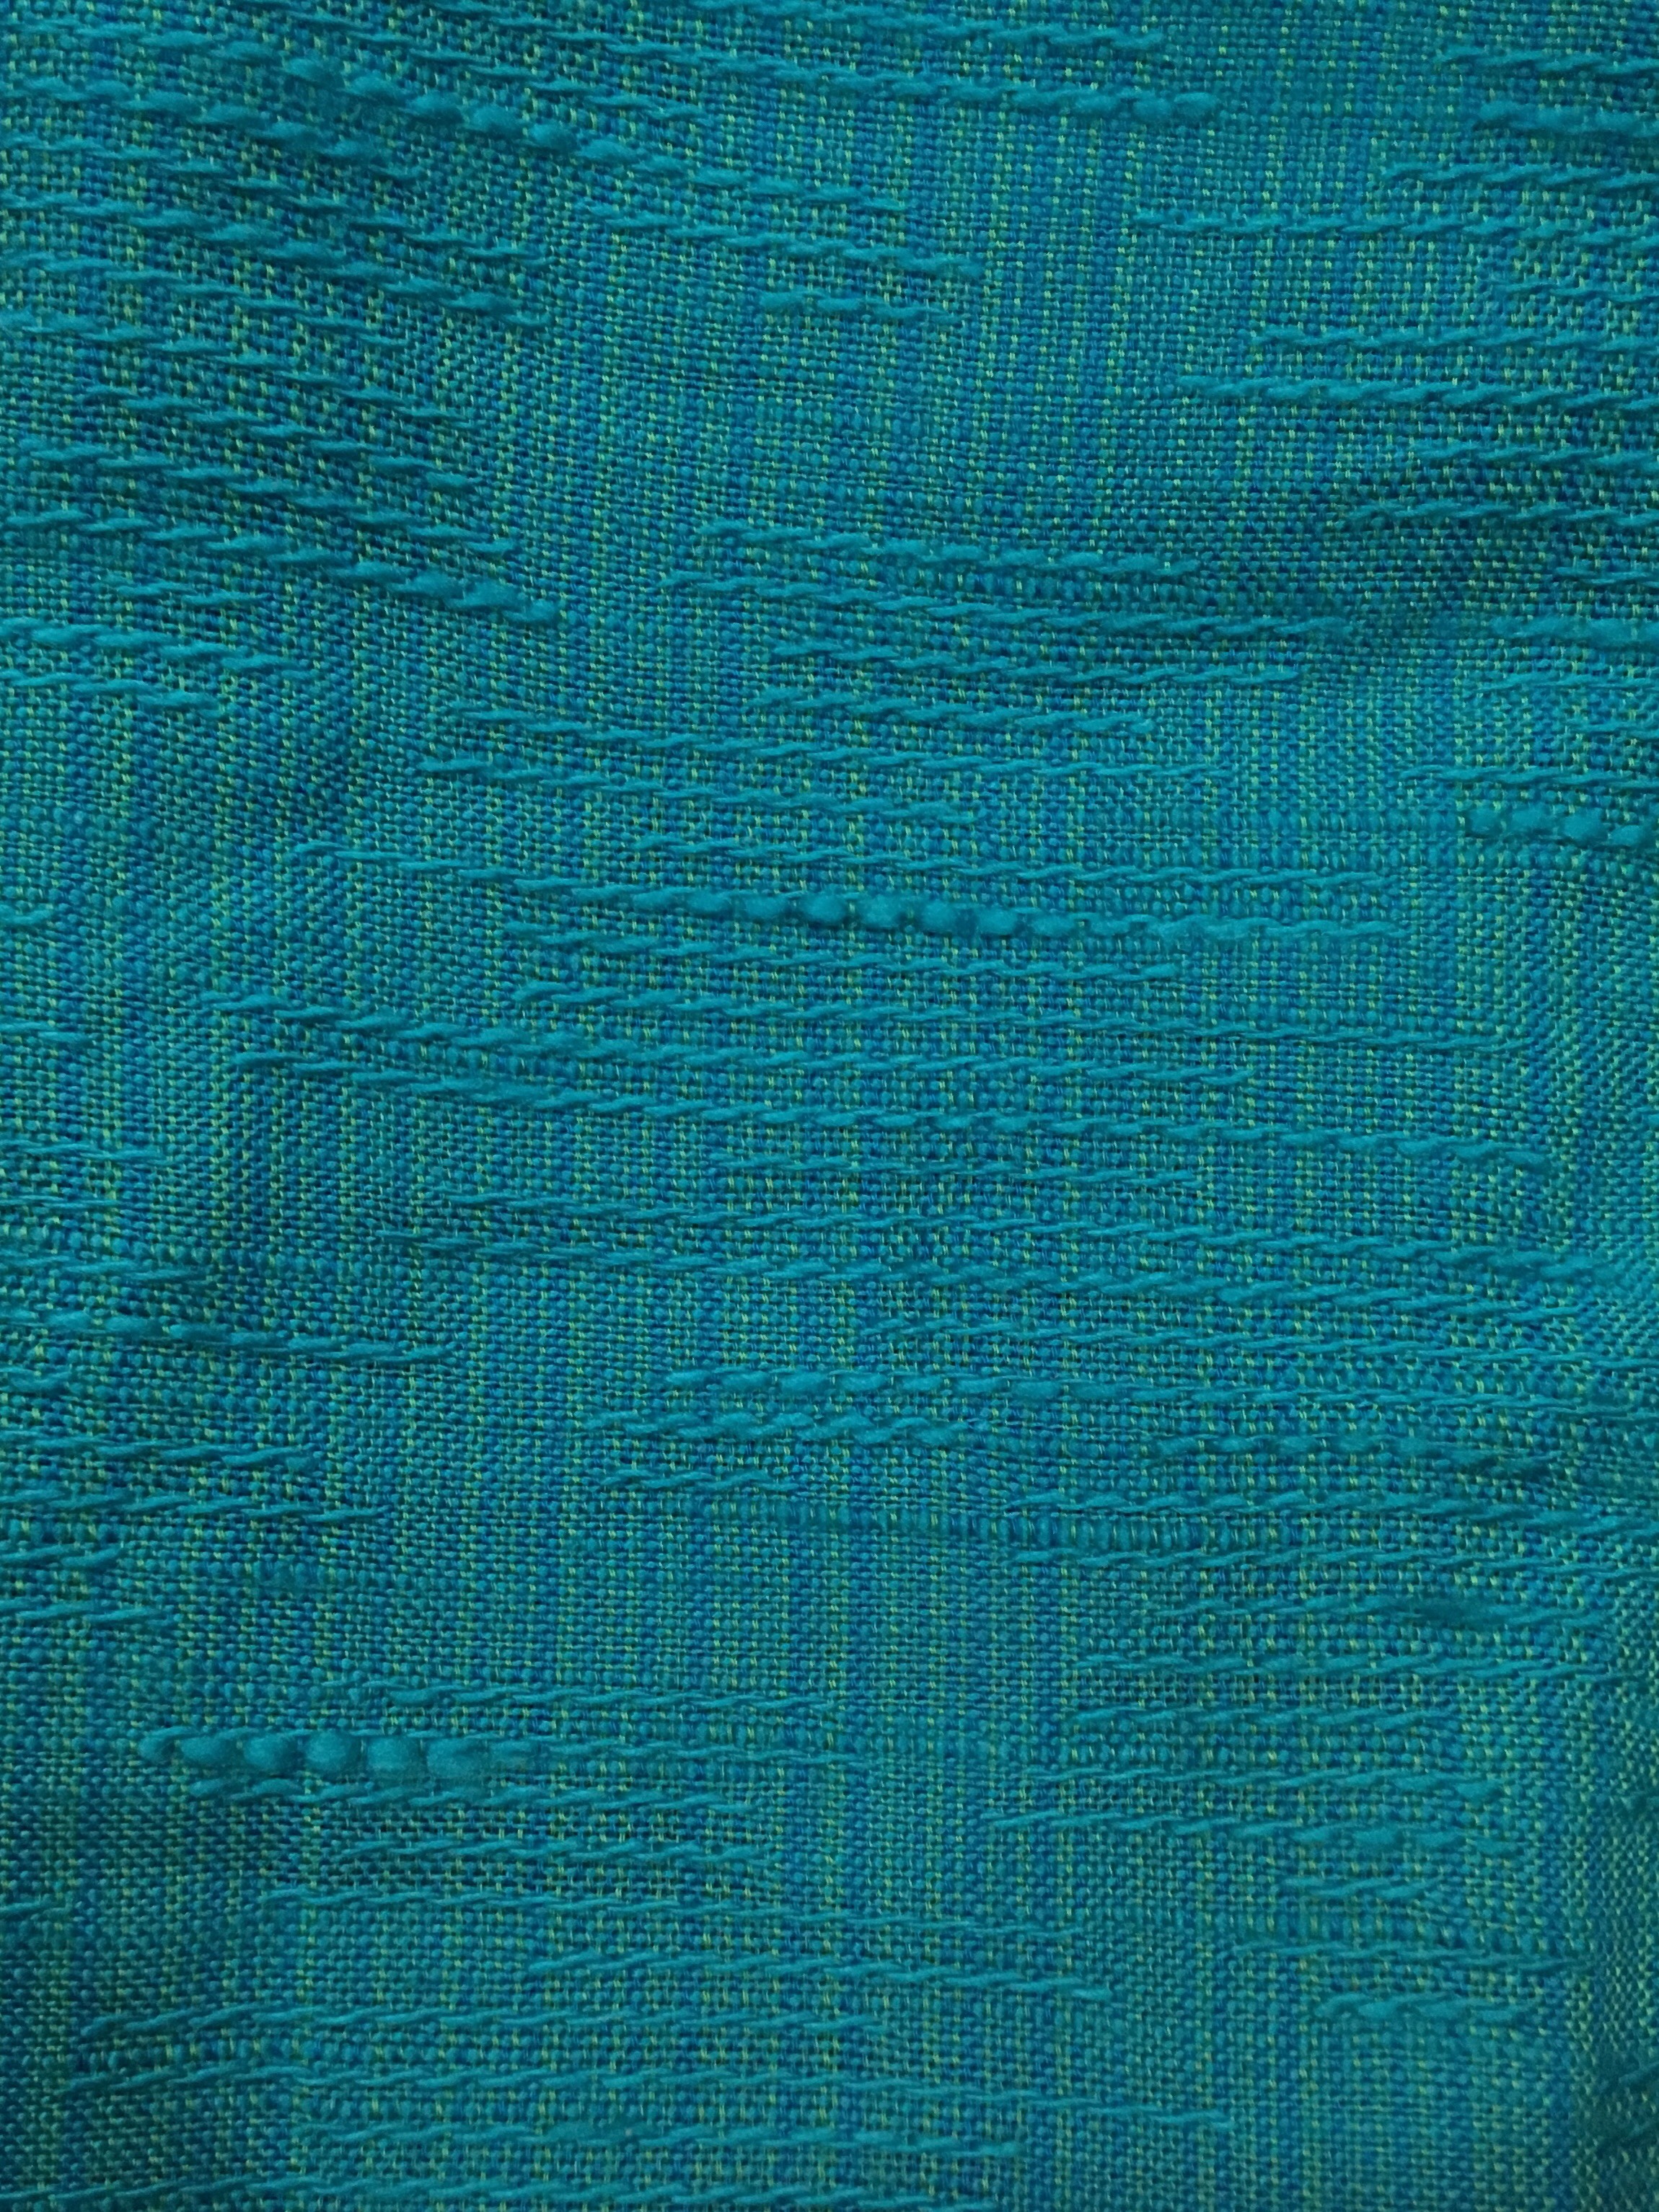 Turquoise Faded Retro Woven Textured